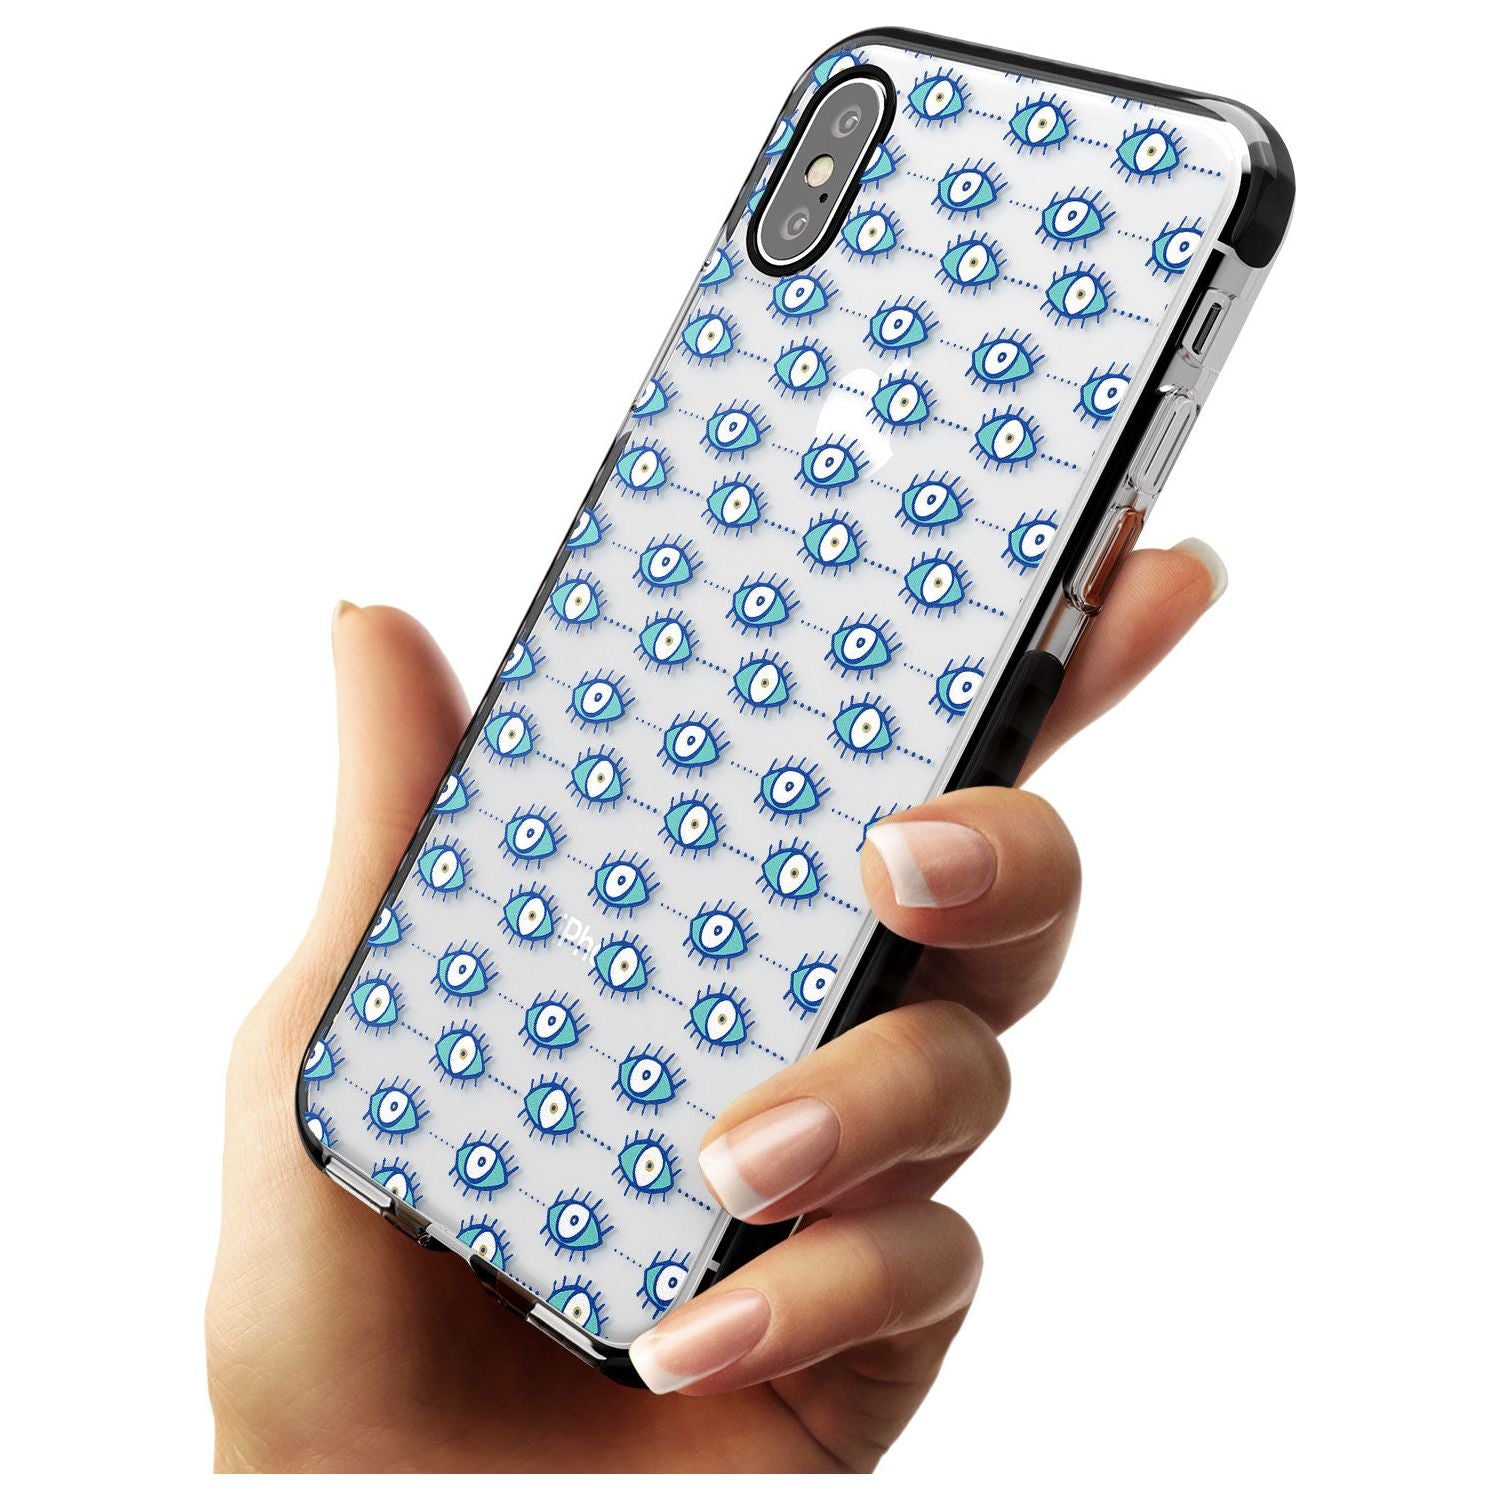 Crazy Eyes (Clear) Psychedelic Eyes Pattern Black Impact Phone Case for iPhone X XS Max XR